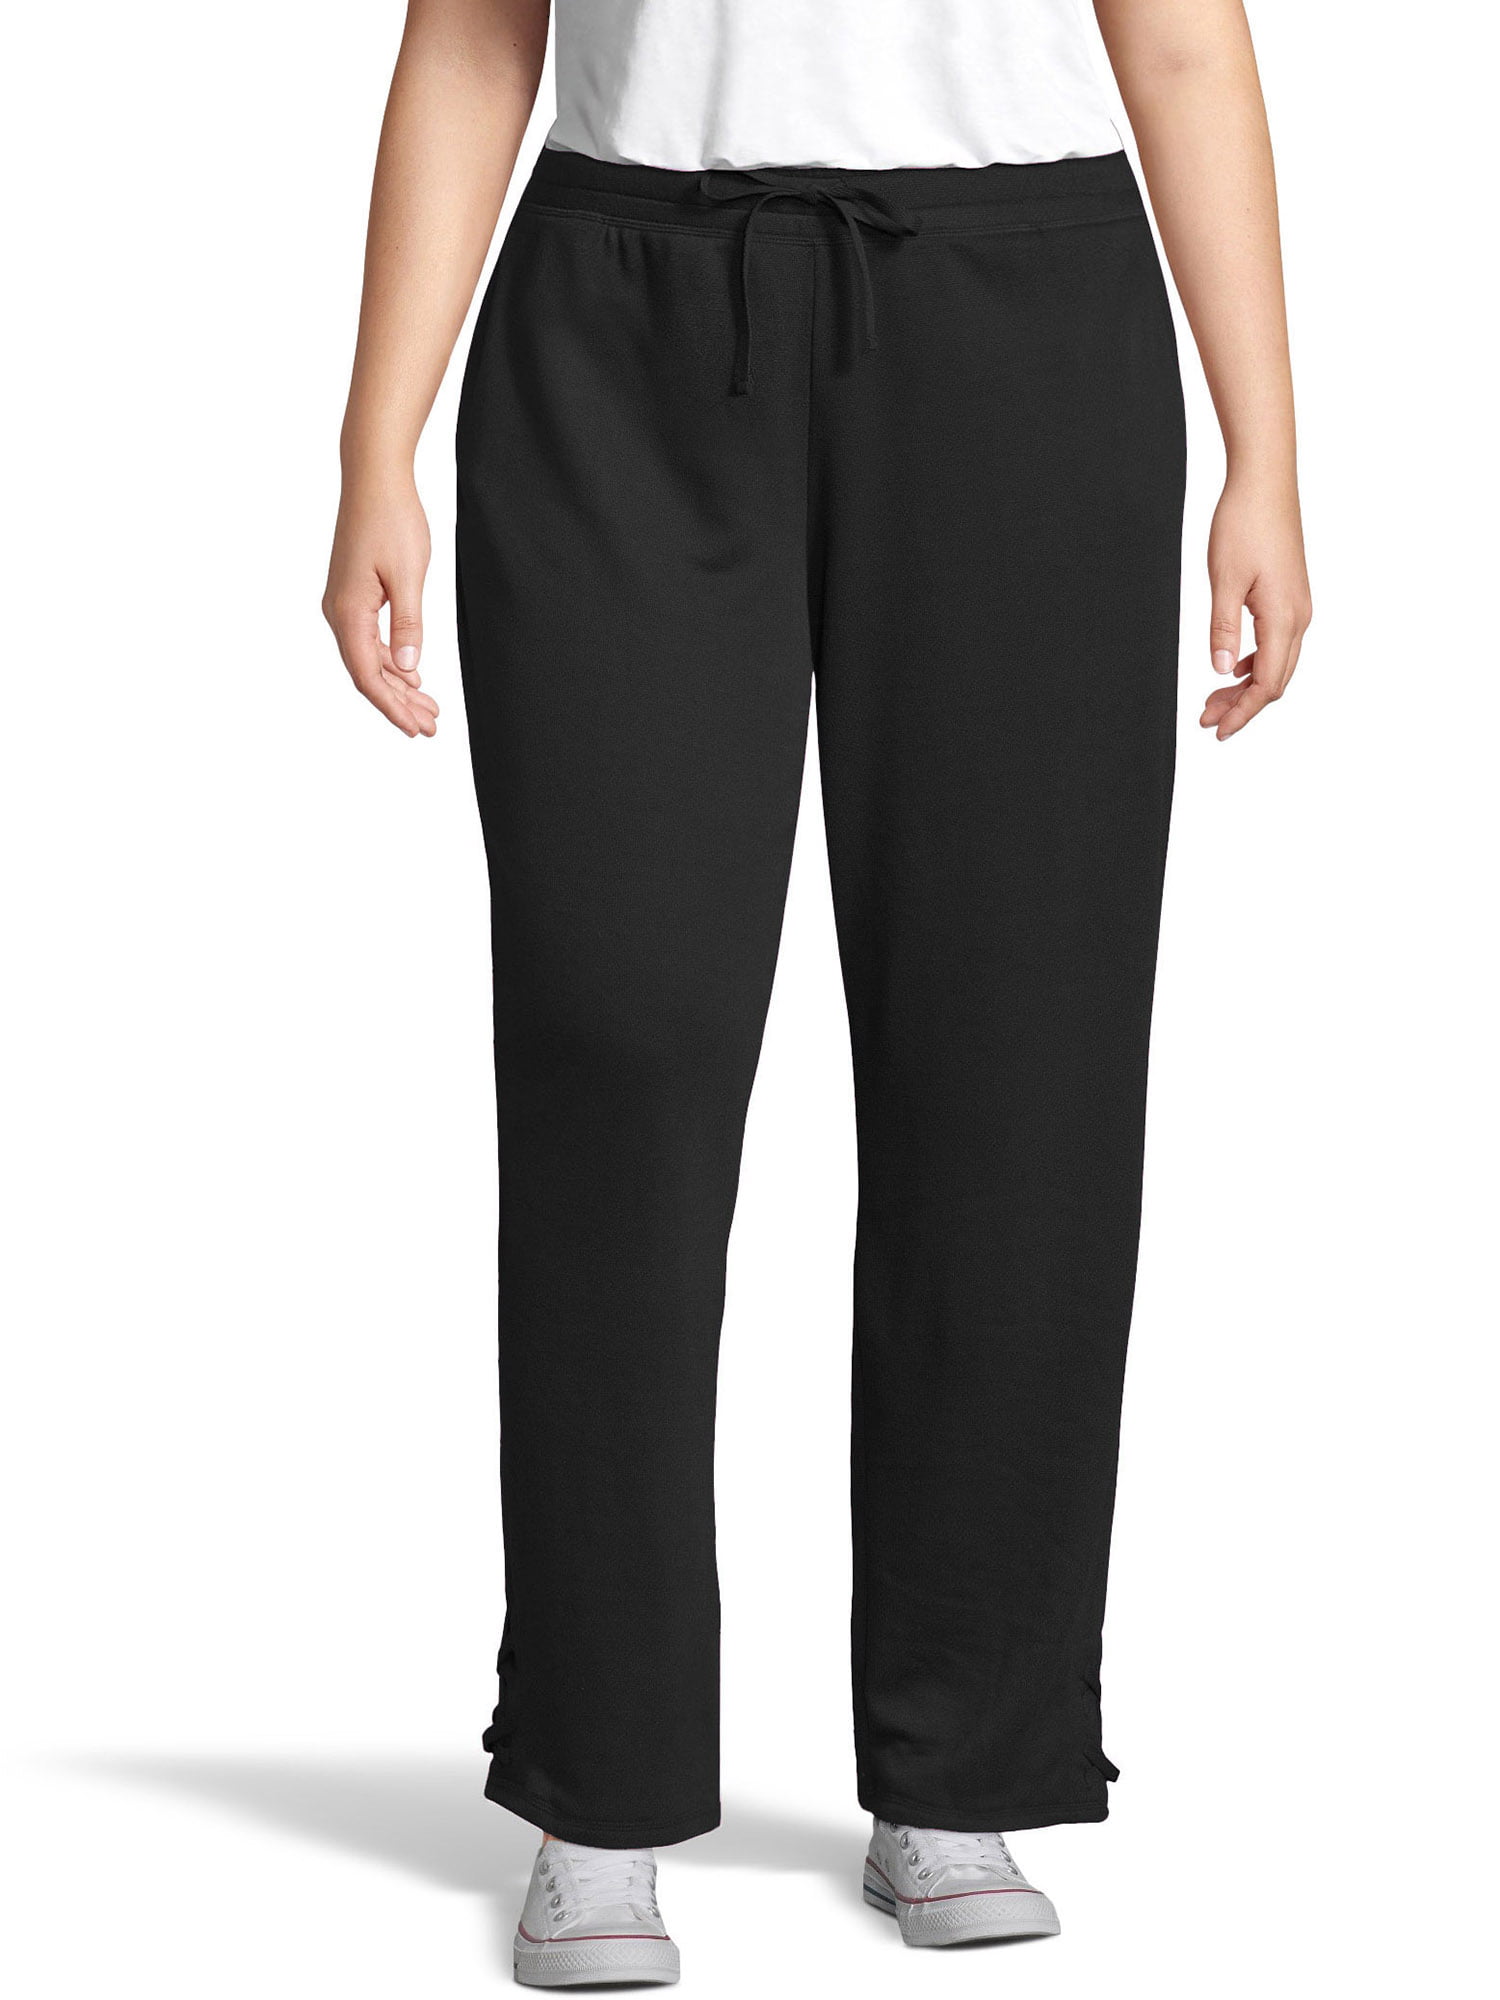 Just My Size - Women's Plus Size French Terry Jogger with Lace-up Legs ...